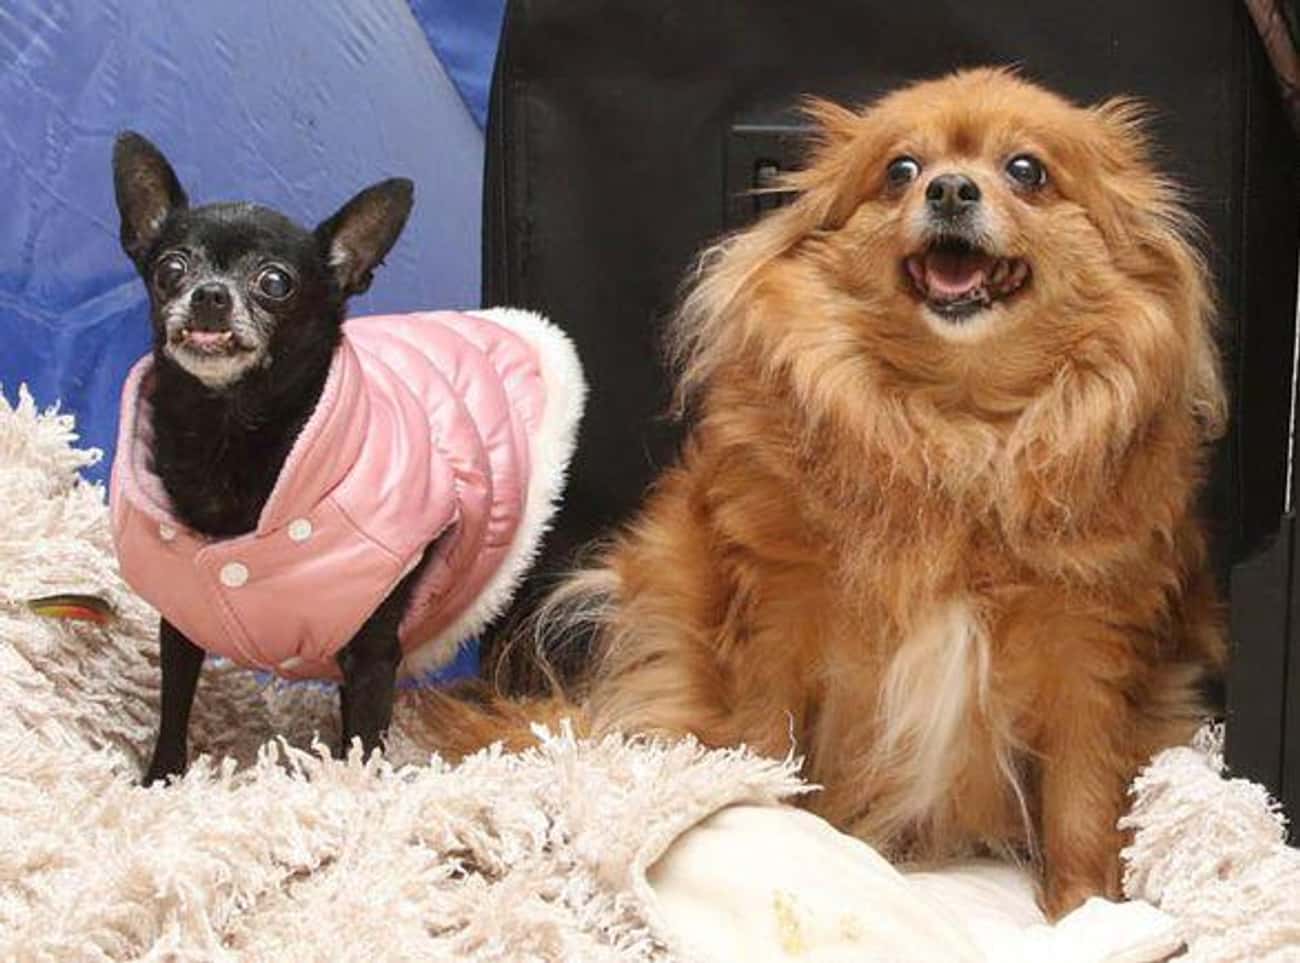 Sandy Ran Into A Burning Home To Save Her Best Friend: A Blind Chihuahua